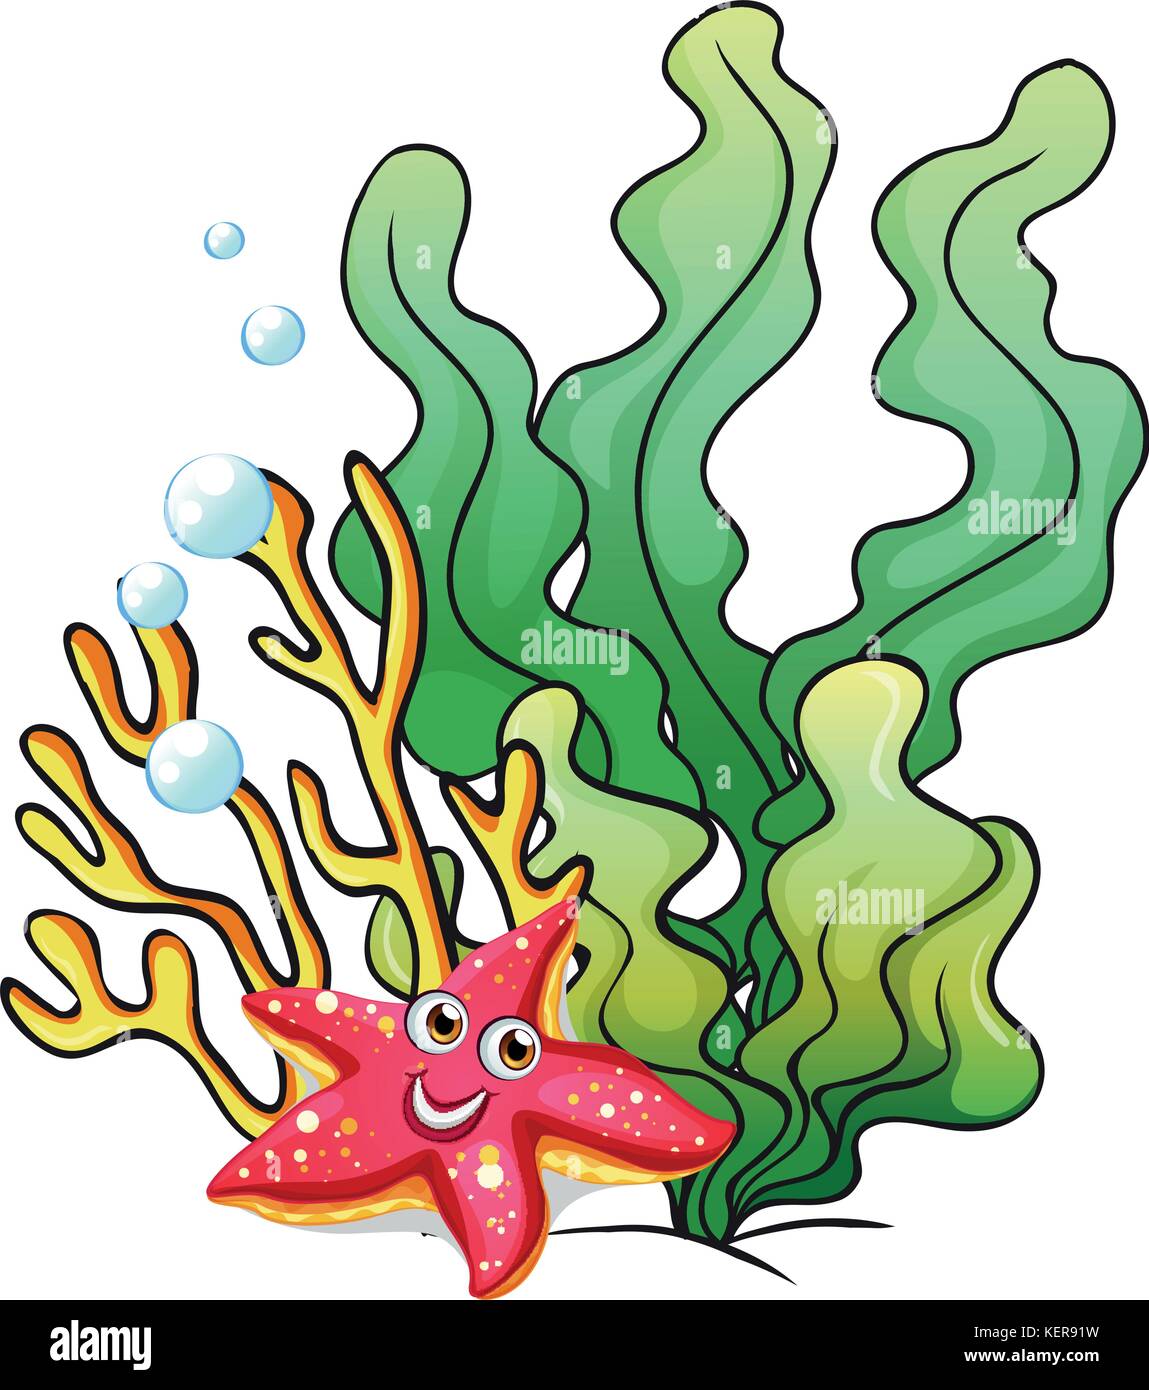 Illustration of the coral reefs with a smiling starfish on a white ...